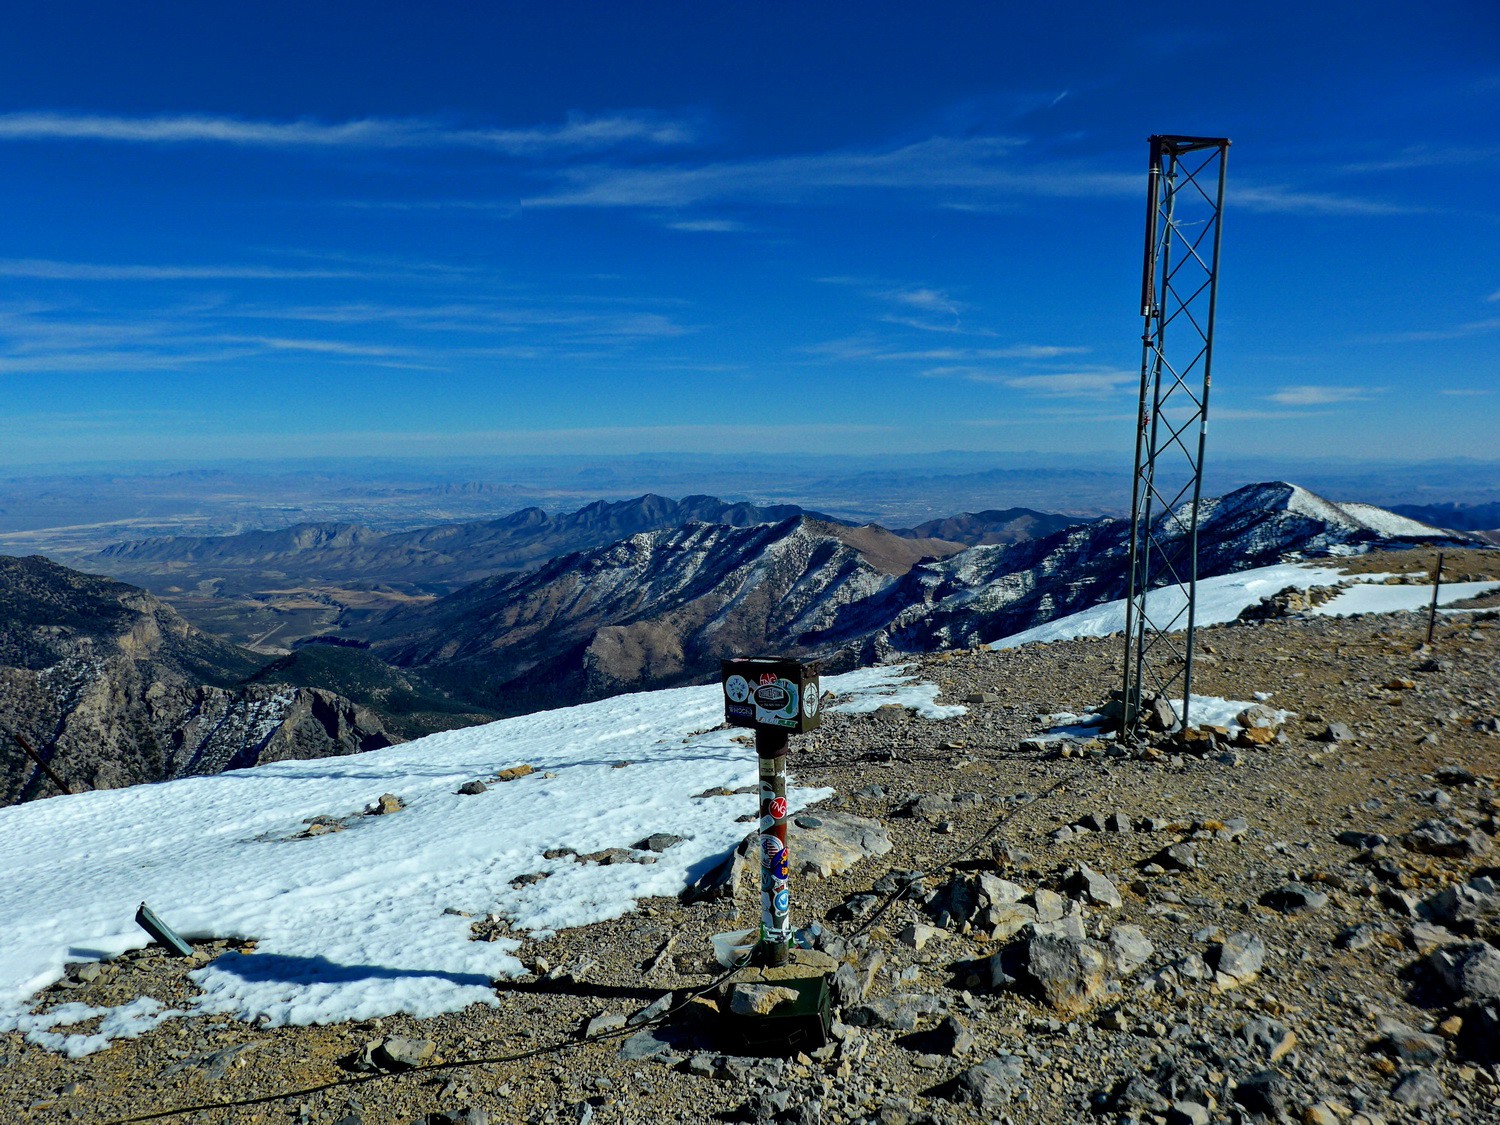 Summit of 3625 meters high Mount Charleston, one of the most prominent peaks of USA